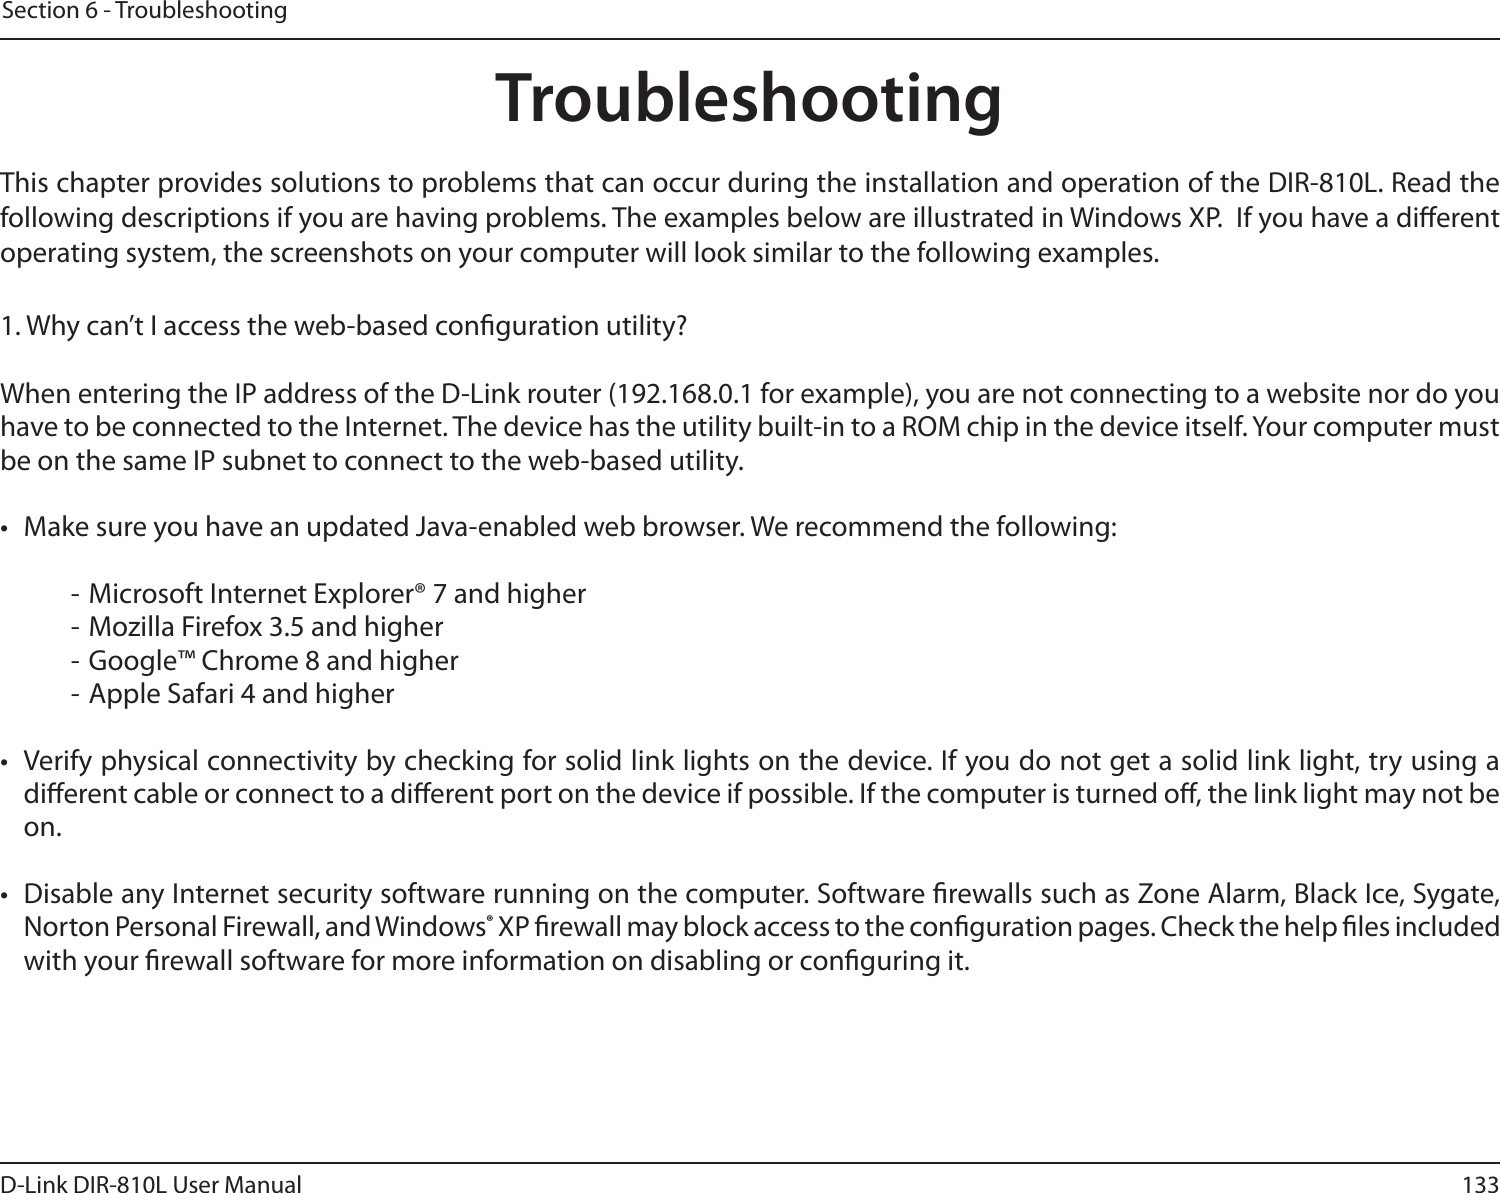 133D-Link DIR-810L User ManualSection 6 - TroubleshootingTroubleshootingThis chapter provides solutions to problems that can occur during the installation and operation of the DIR-810L. Read the following descriptions if you are having problems. The examples below are illustrated in Windows XP.  If you have a dierent operating system, the screenshots on your computer will look similar to the following examples.1. Why can’t I access the web-based conguration utility?When entering the IP address of the D-Link router (192.168.0.1 for example), you are not connecting to a website nor do you have to be connected to the Internet. The device has the utility built-in to a ROM chip in the device itself. Your computer must be on the same IP subnet to connect to the web-based utility. •  Make sure you have an updated Java-enabled web browser. We recommend the following:  - Microsoft Internet Explorer® 7 and higher- Mozilla Firefox 3.5 and higher- Google™ Chrome 8 and higher- Apple Safari 4 and higher•  Verify physical connectivity by checking for solid link lights on the device. If you do not get a solid link light, try using a dierent cable or connect to a dierent port on the device if possible. If the computer is turned o, the link light may not be on.•  Disable any Internet security software running on the computer. Software rewalls such as Zone Alarm, Black Ice, Sygate, Norton Personal Firewall, and Windows® XP rewall may block access to the conguration pages. Check the help les included with your rewall software for more information on disabling or conguring it.